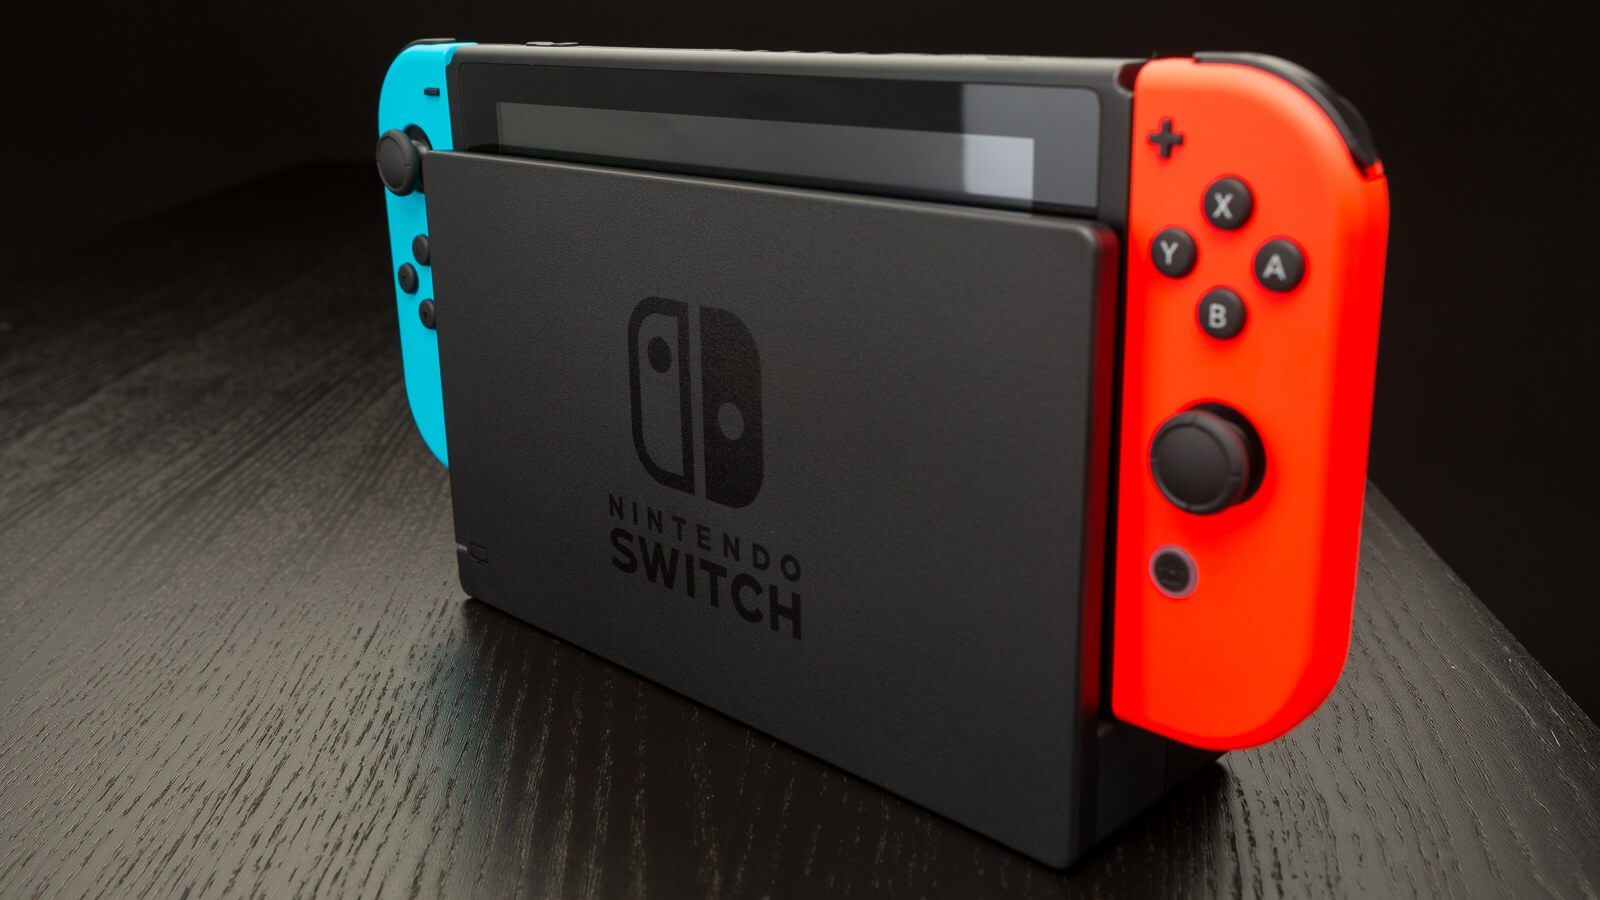 YouTube officially launches on the Nintendo Switch